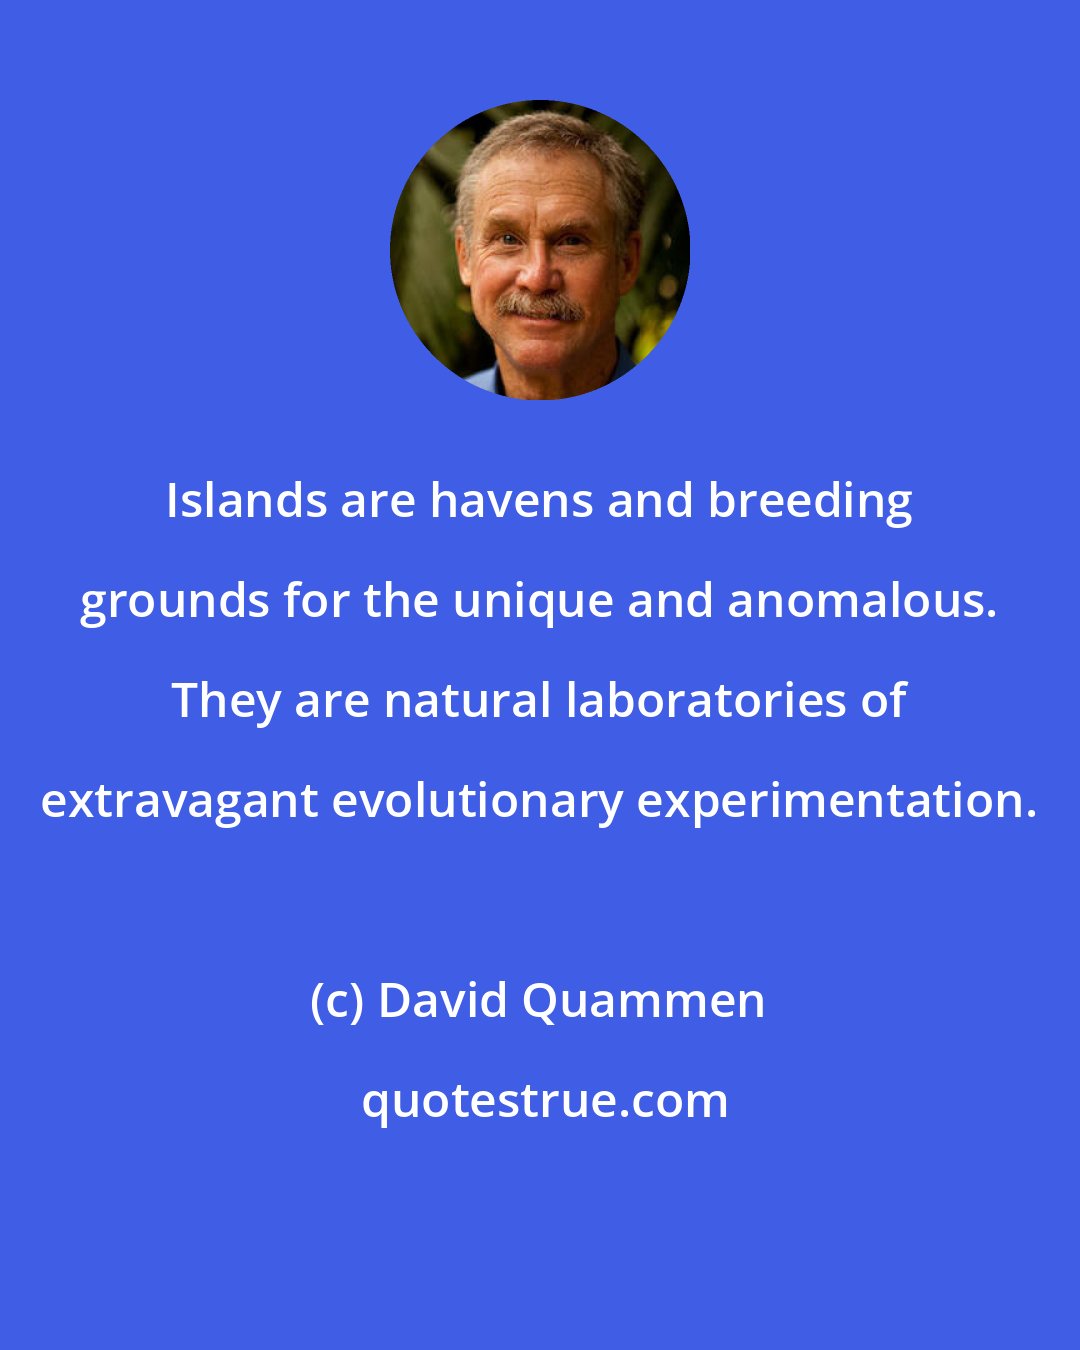 David Quammen: Islands are havens and breeding grounds for the unique and anomalous. They are natural laboratories of extravagant evolutionary experimentation.